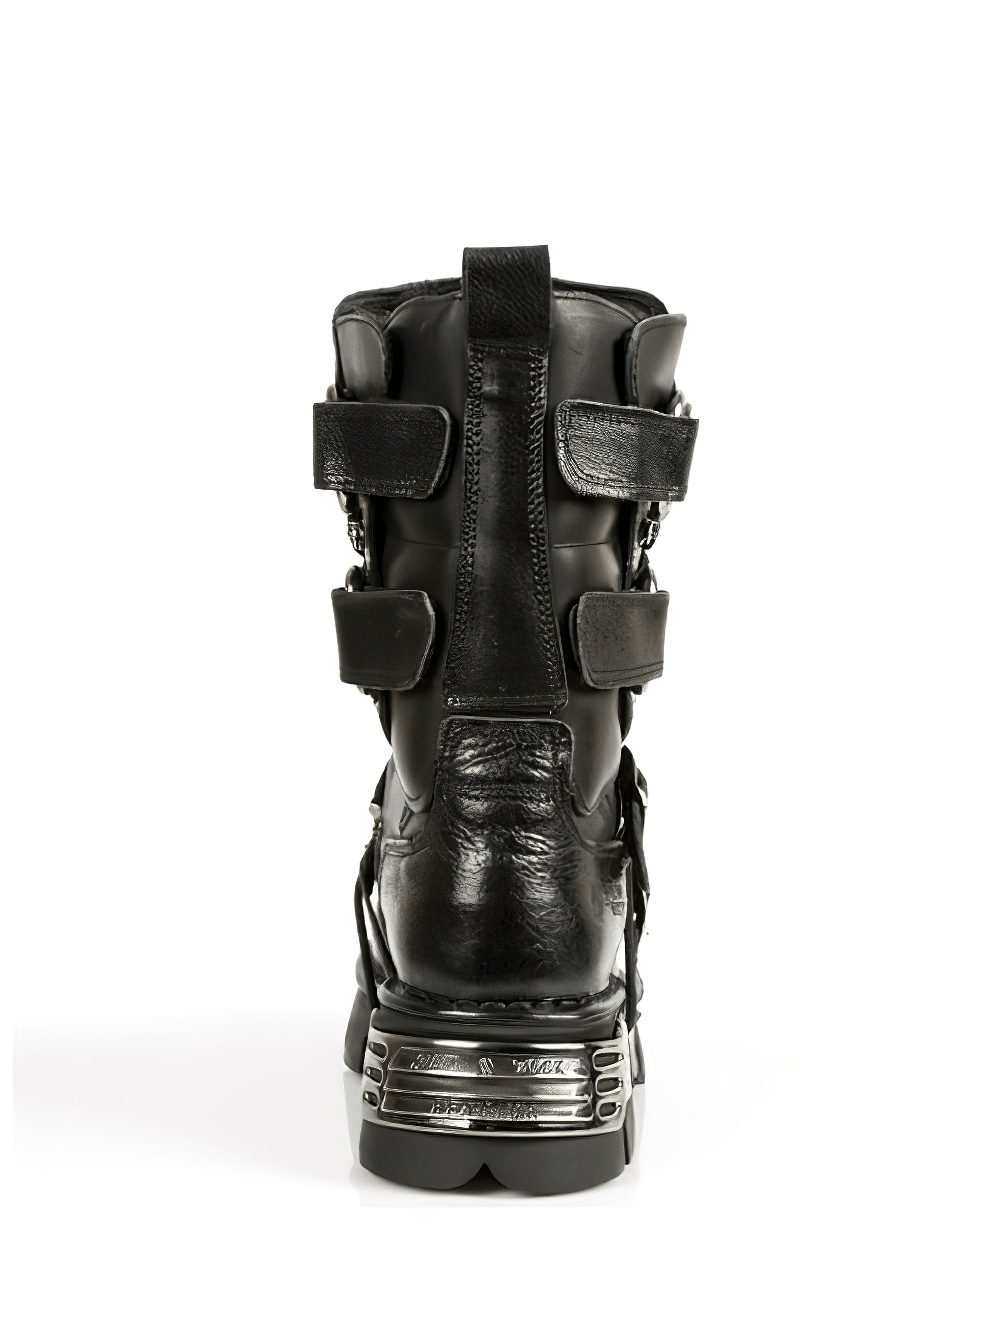 NEW ROCK Gothic Black Leather Boots with Metal Accents